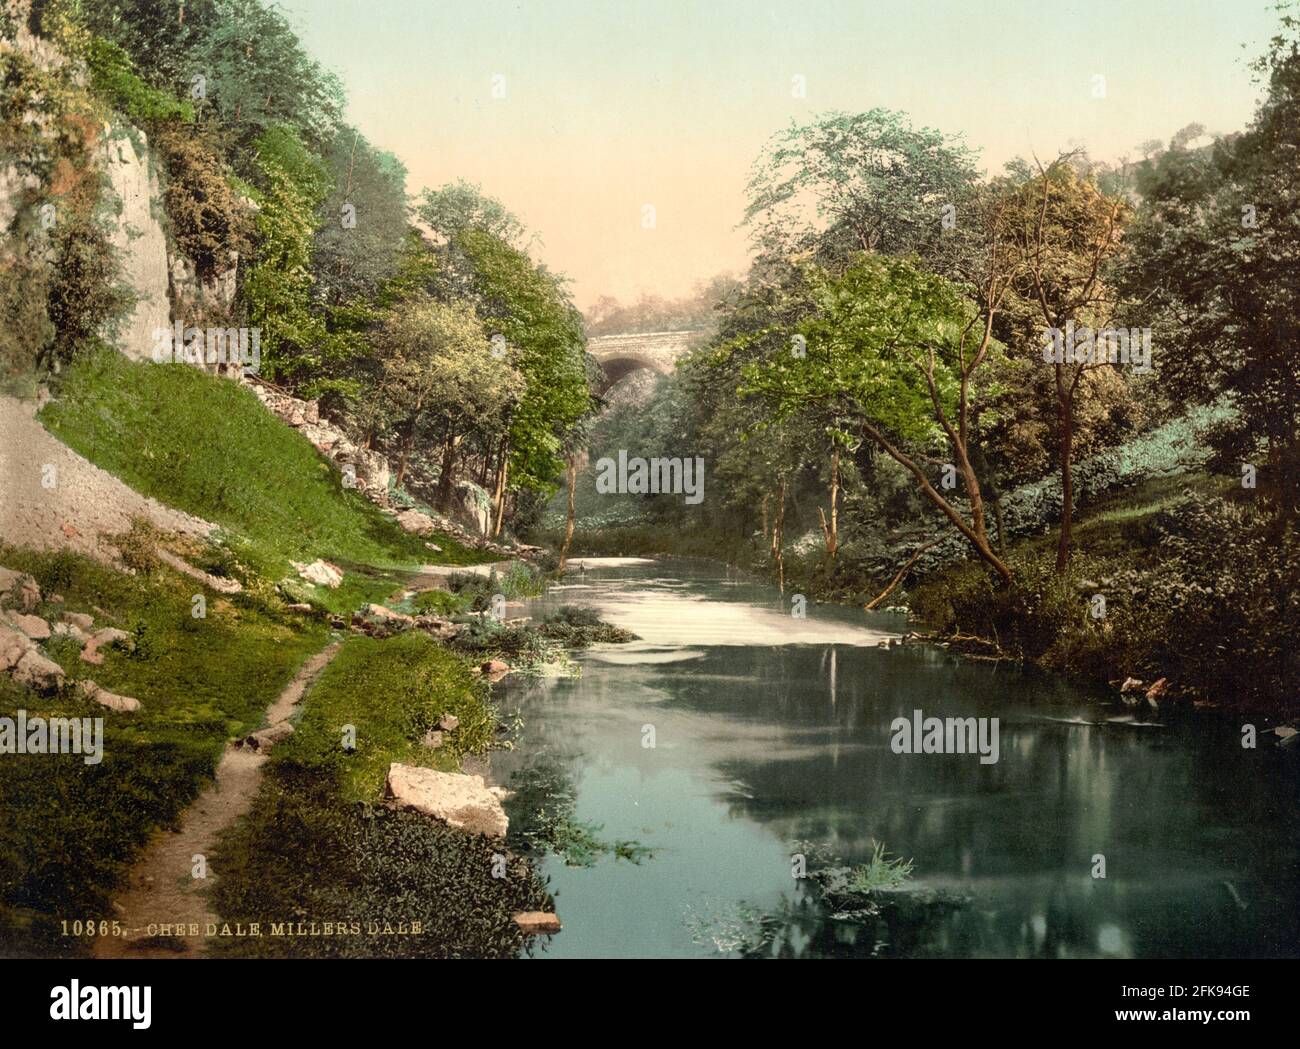 Chee Dale and the River Wye near Buxton, Derbyshire circa 1890-1900 Stock Photo